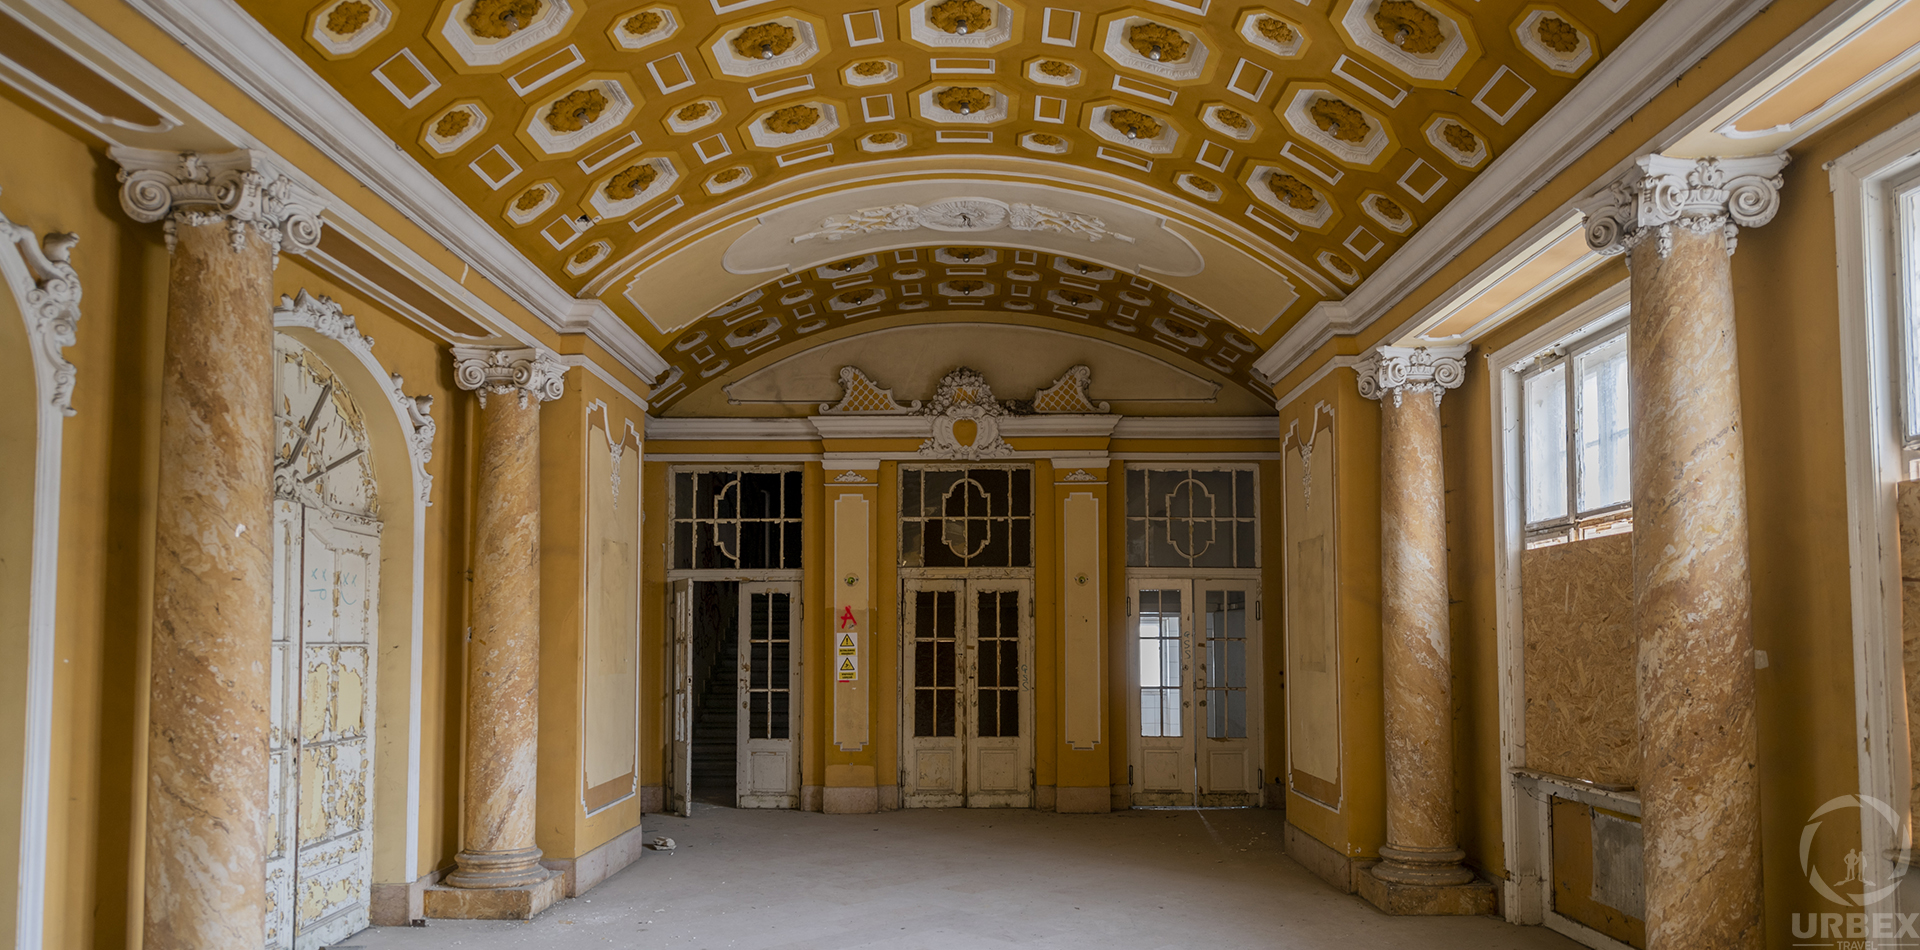 Urbex photography in Hungary